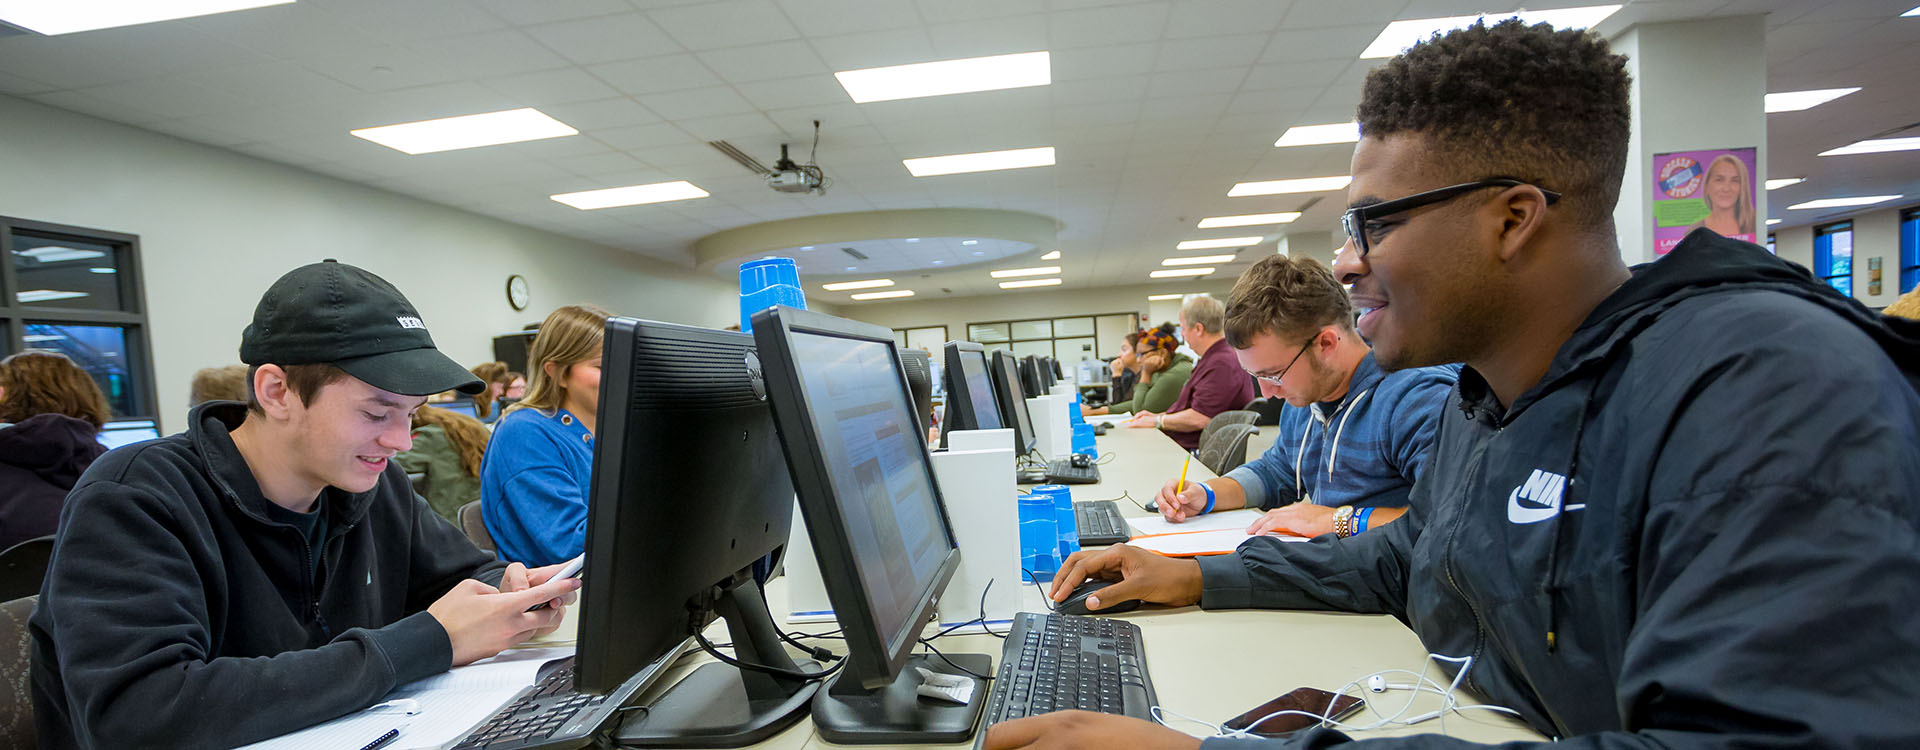 students using computers in the Learning Commons